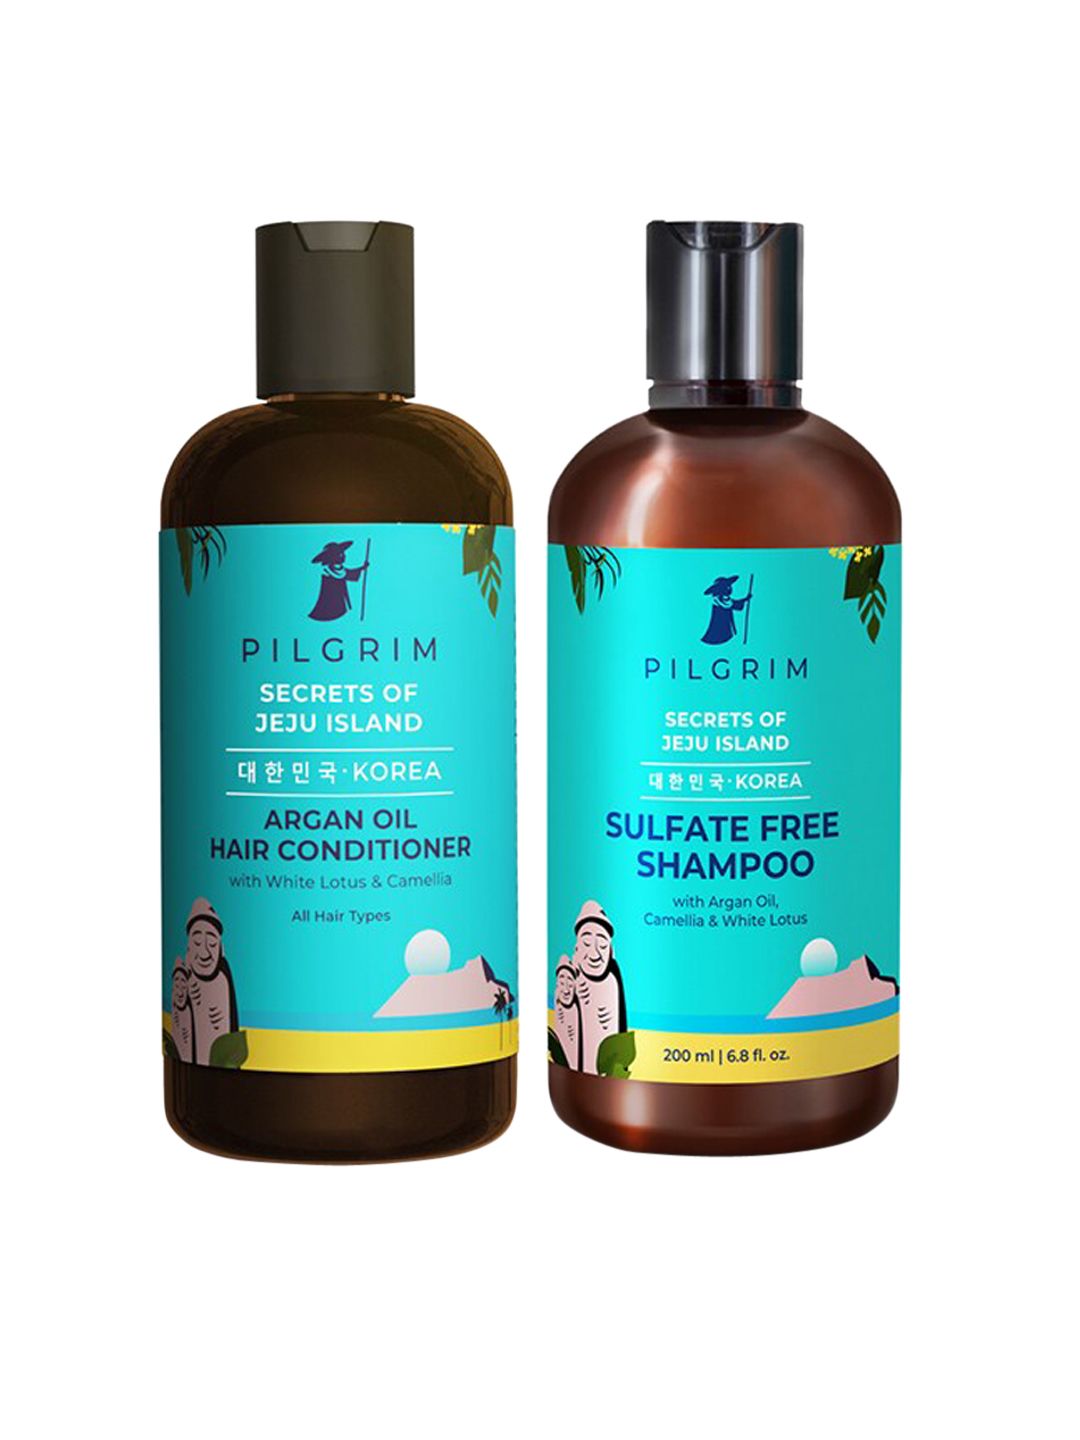 Pilgrim Everyday Hair Cleanse Sulfate-Free Shampoo & Argan Oil Hair Conditioner-200ml Each Price in India